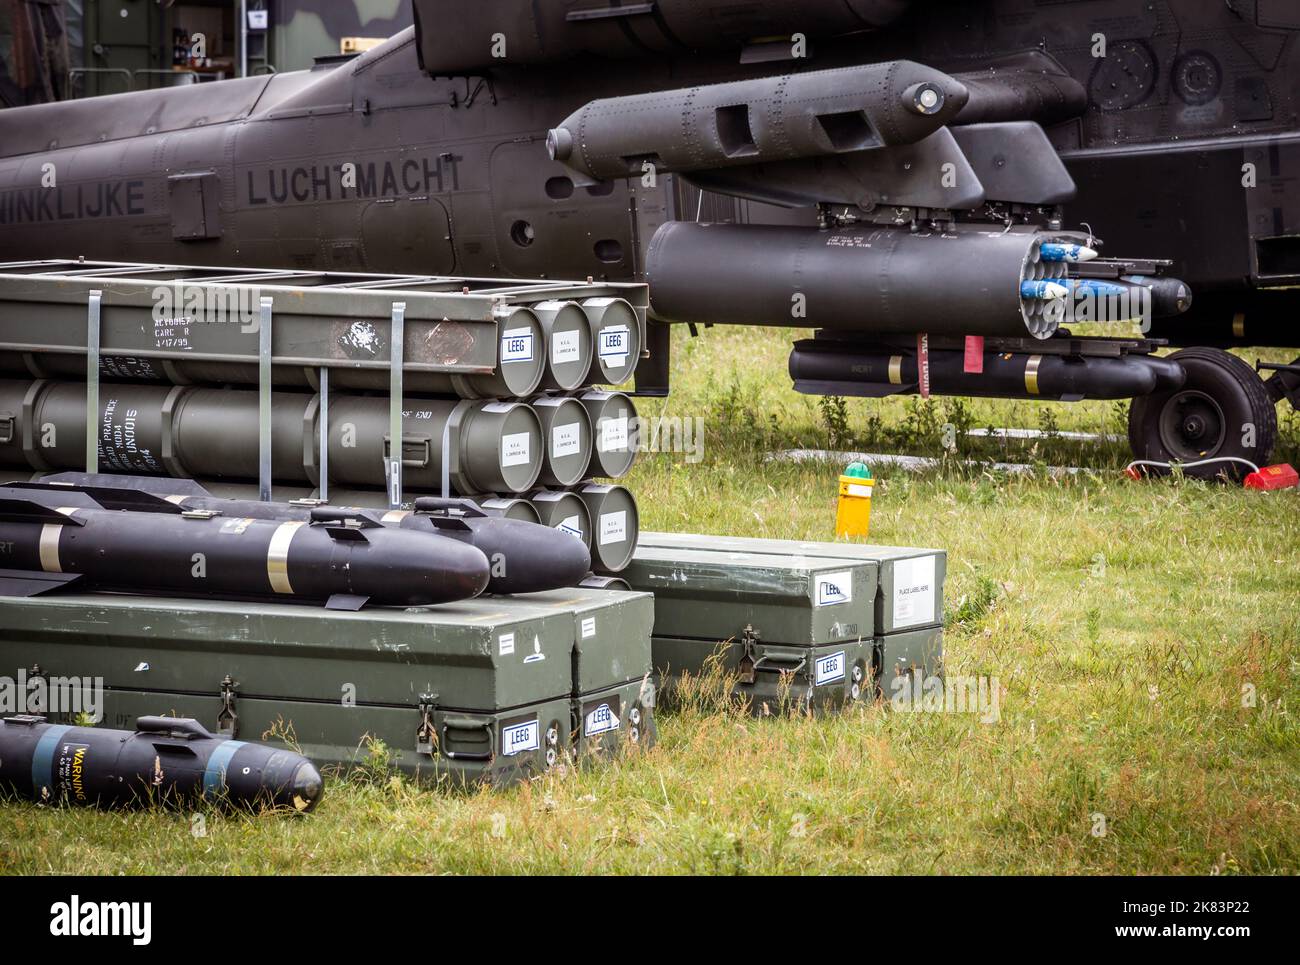 Armament of the Boeing AH-64 Apache attack helicopter. Gilze-Rijen, The Netherlands - June 20, 2014 Stock Photo